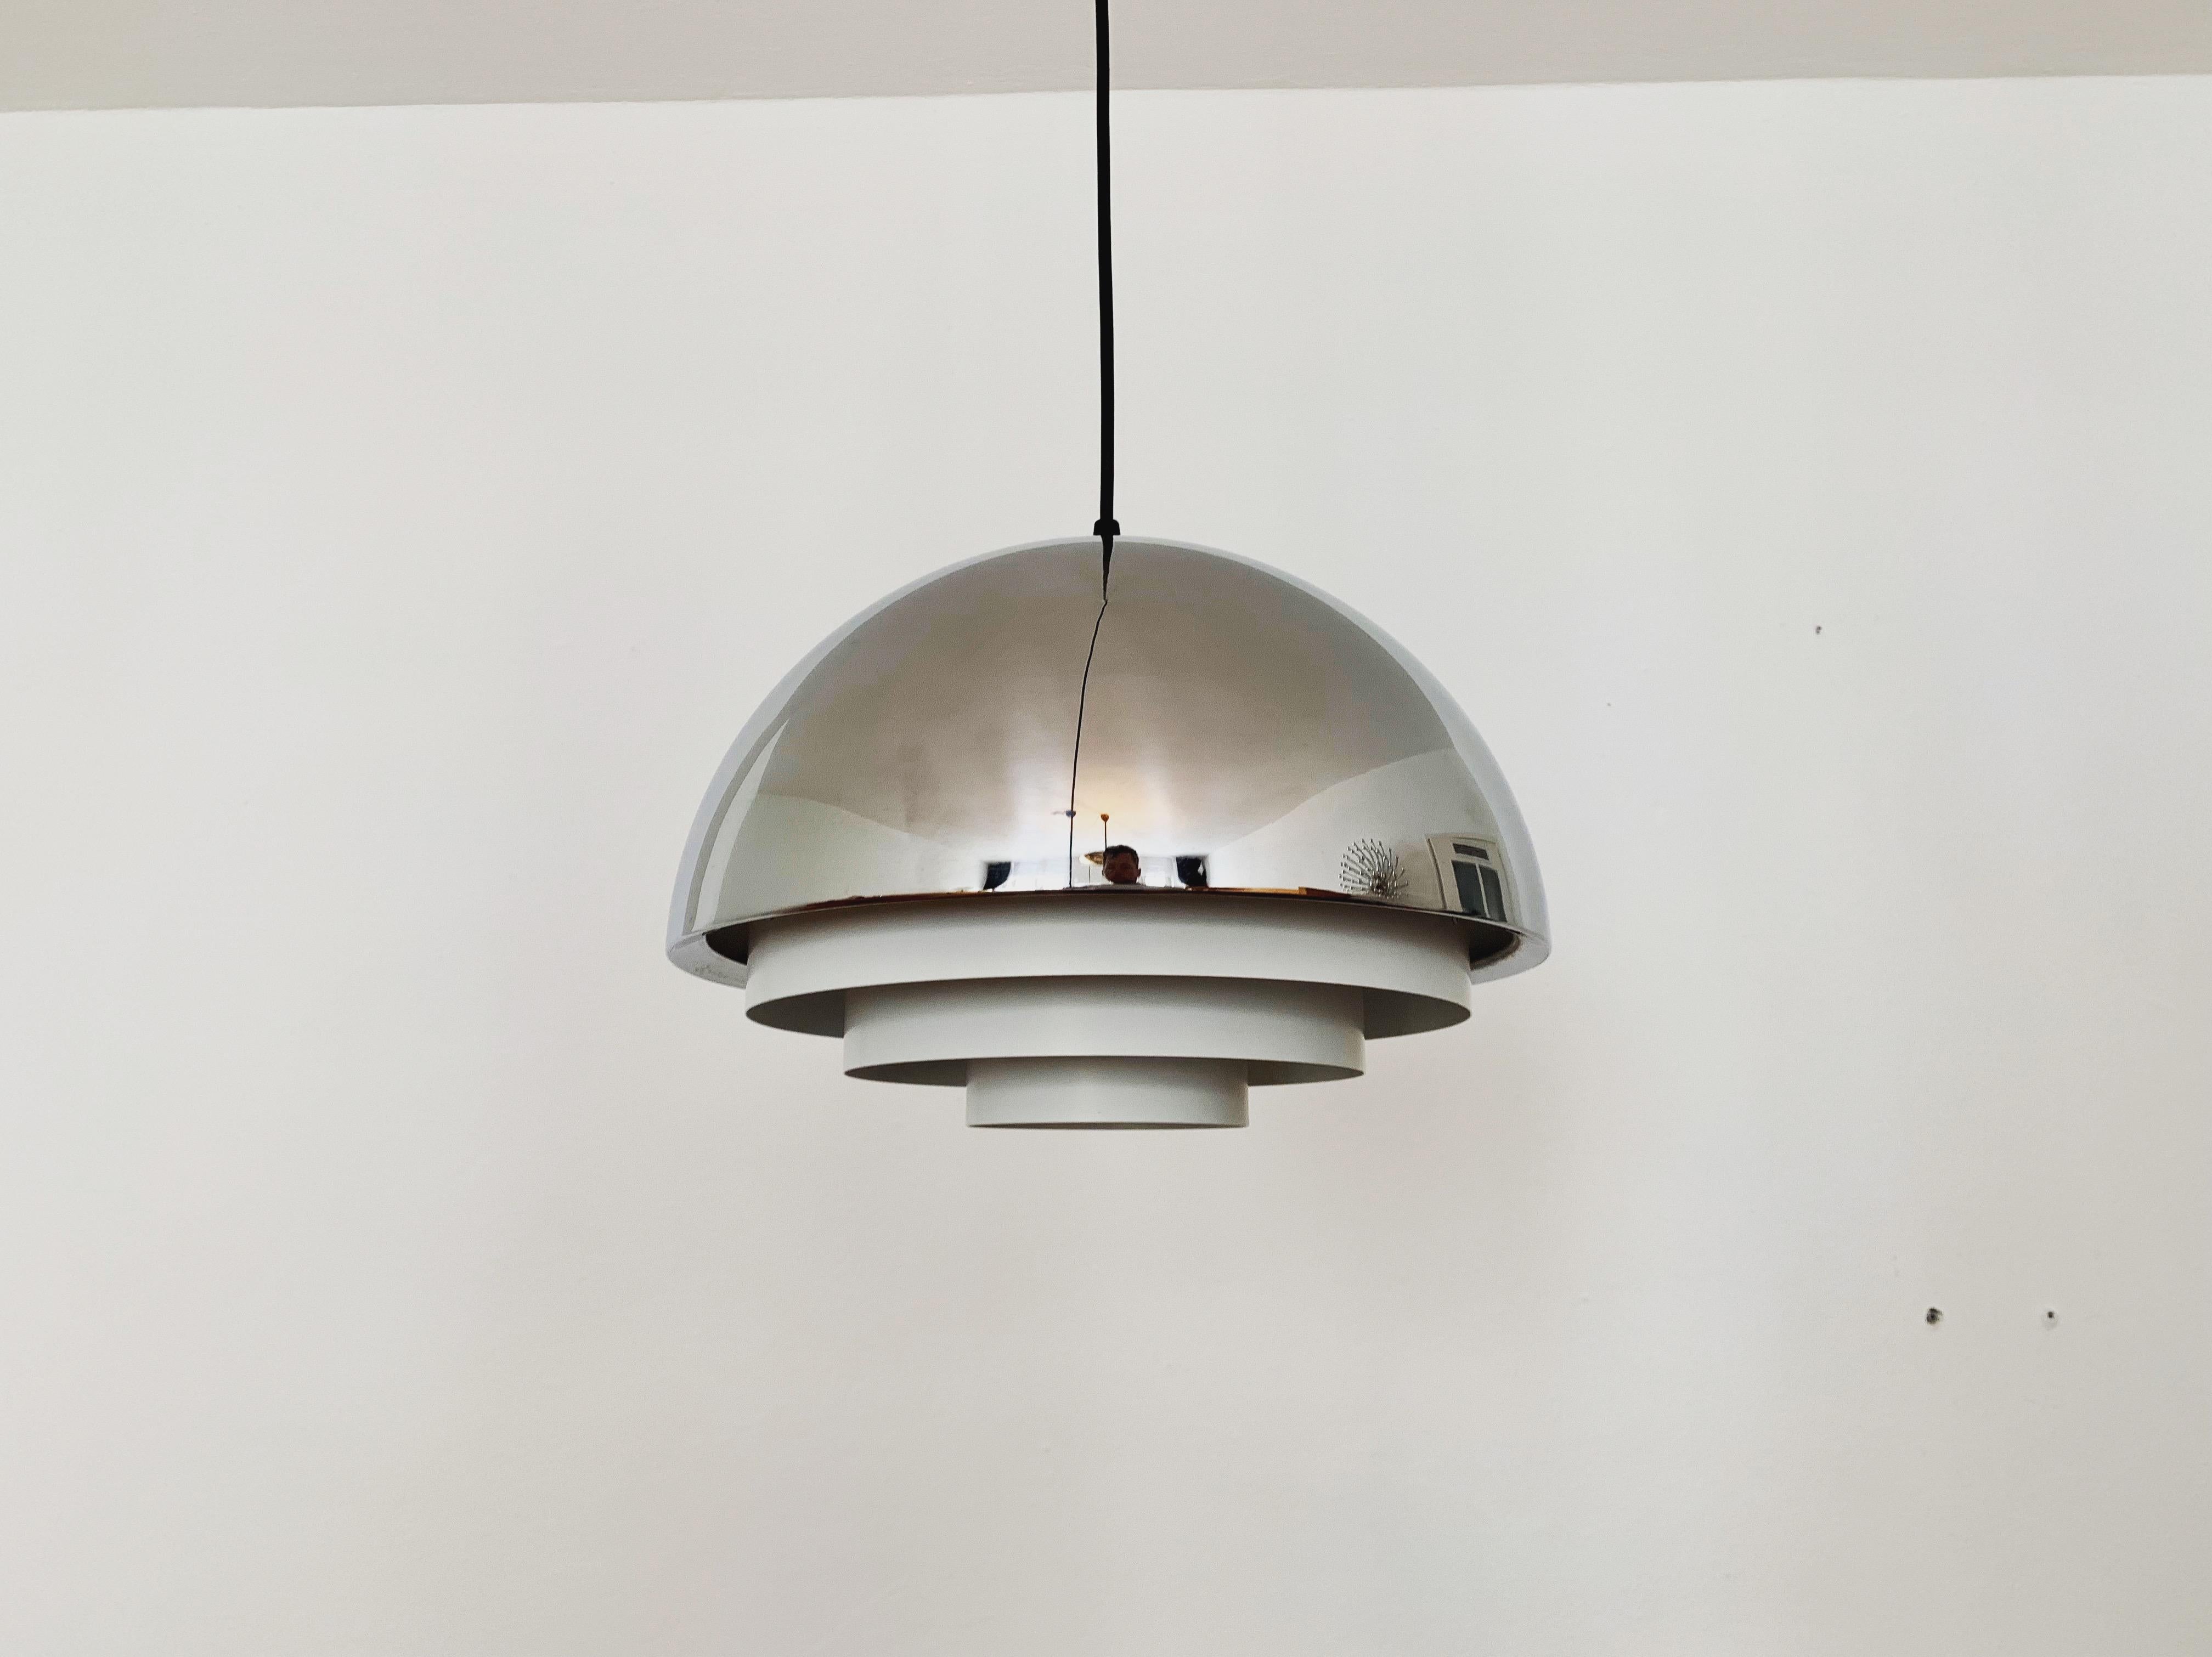 Very nice Milieu Midi pendant lamp by Fog and Morup from the 1960s.
The lighting effect is extremely beautiful.
Impressively beautiful and contemporary design.
A very cozy light is created.

Design: Jo Hammerborg

Condition:

Very good vintage